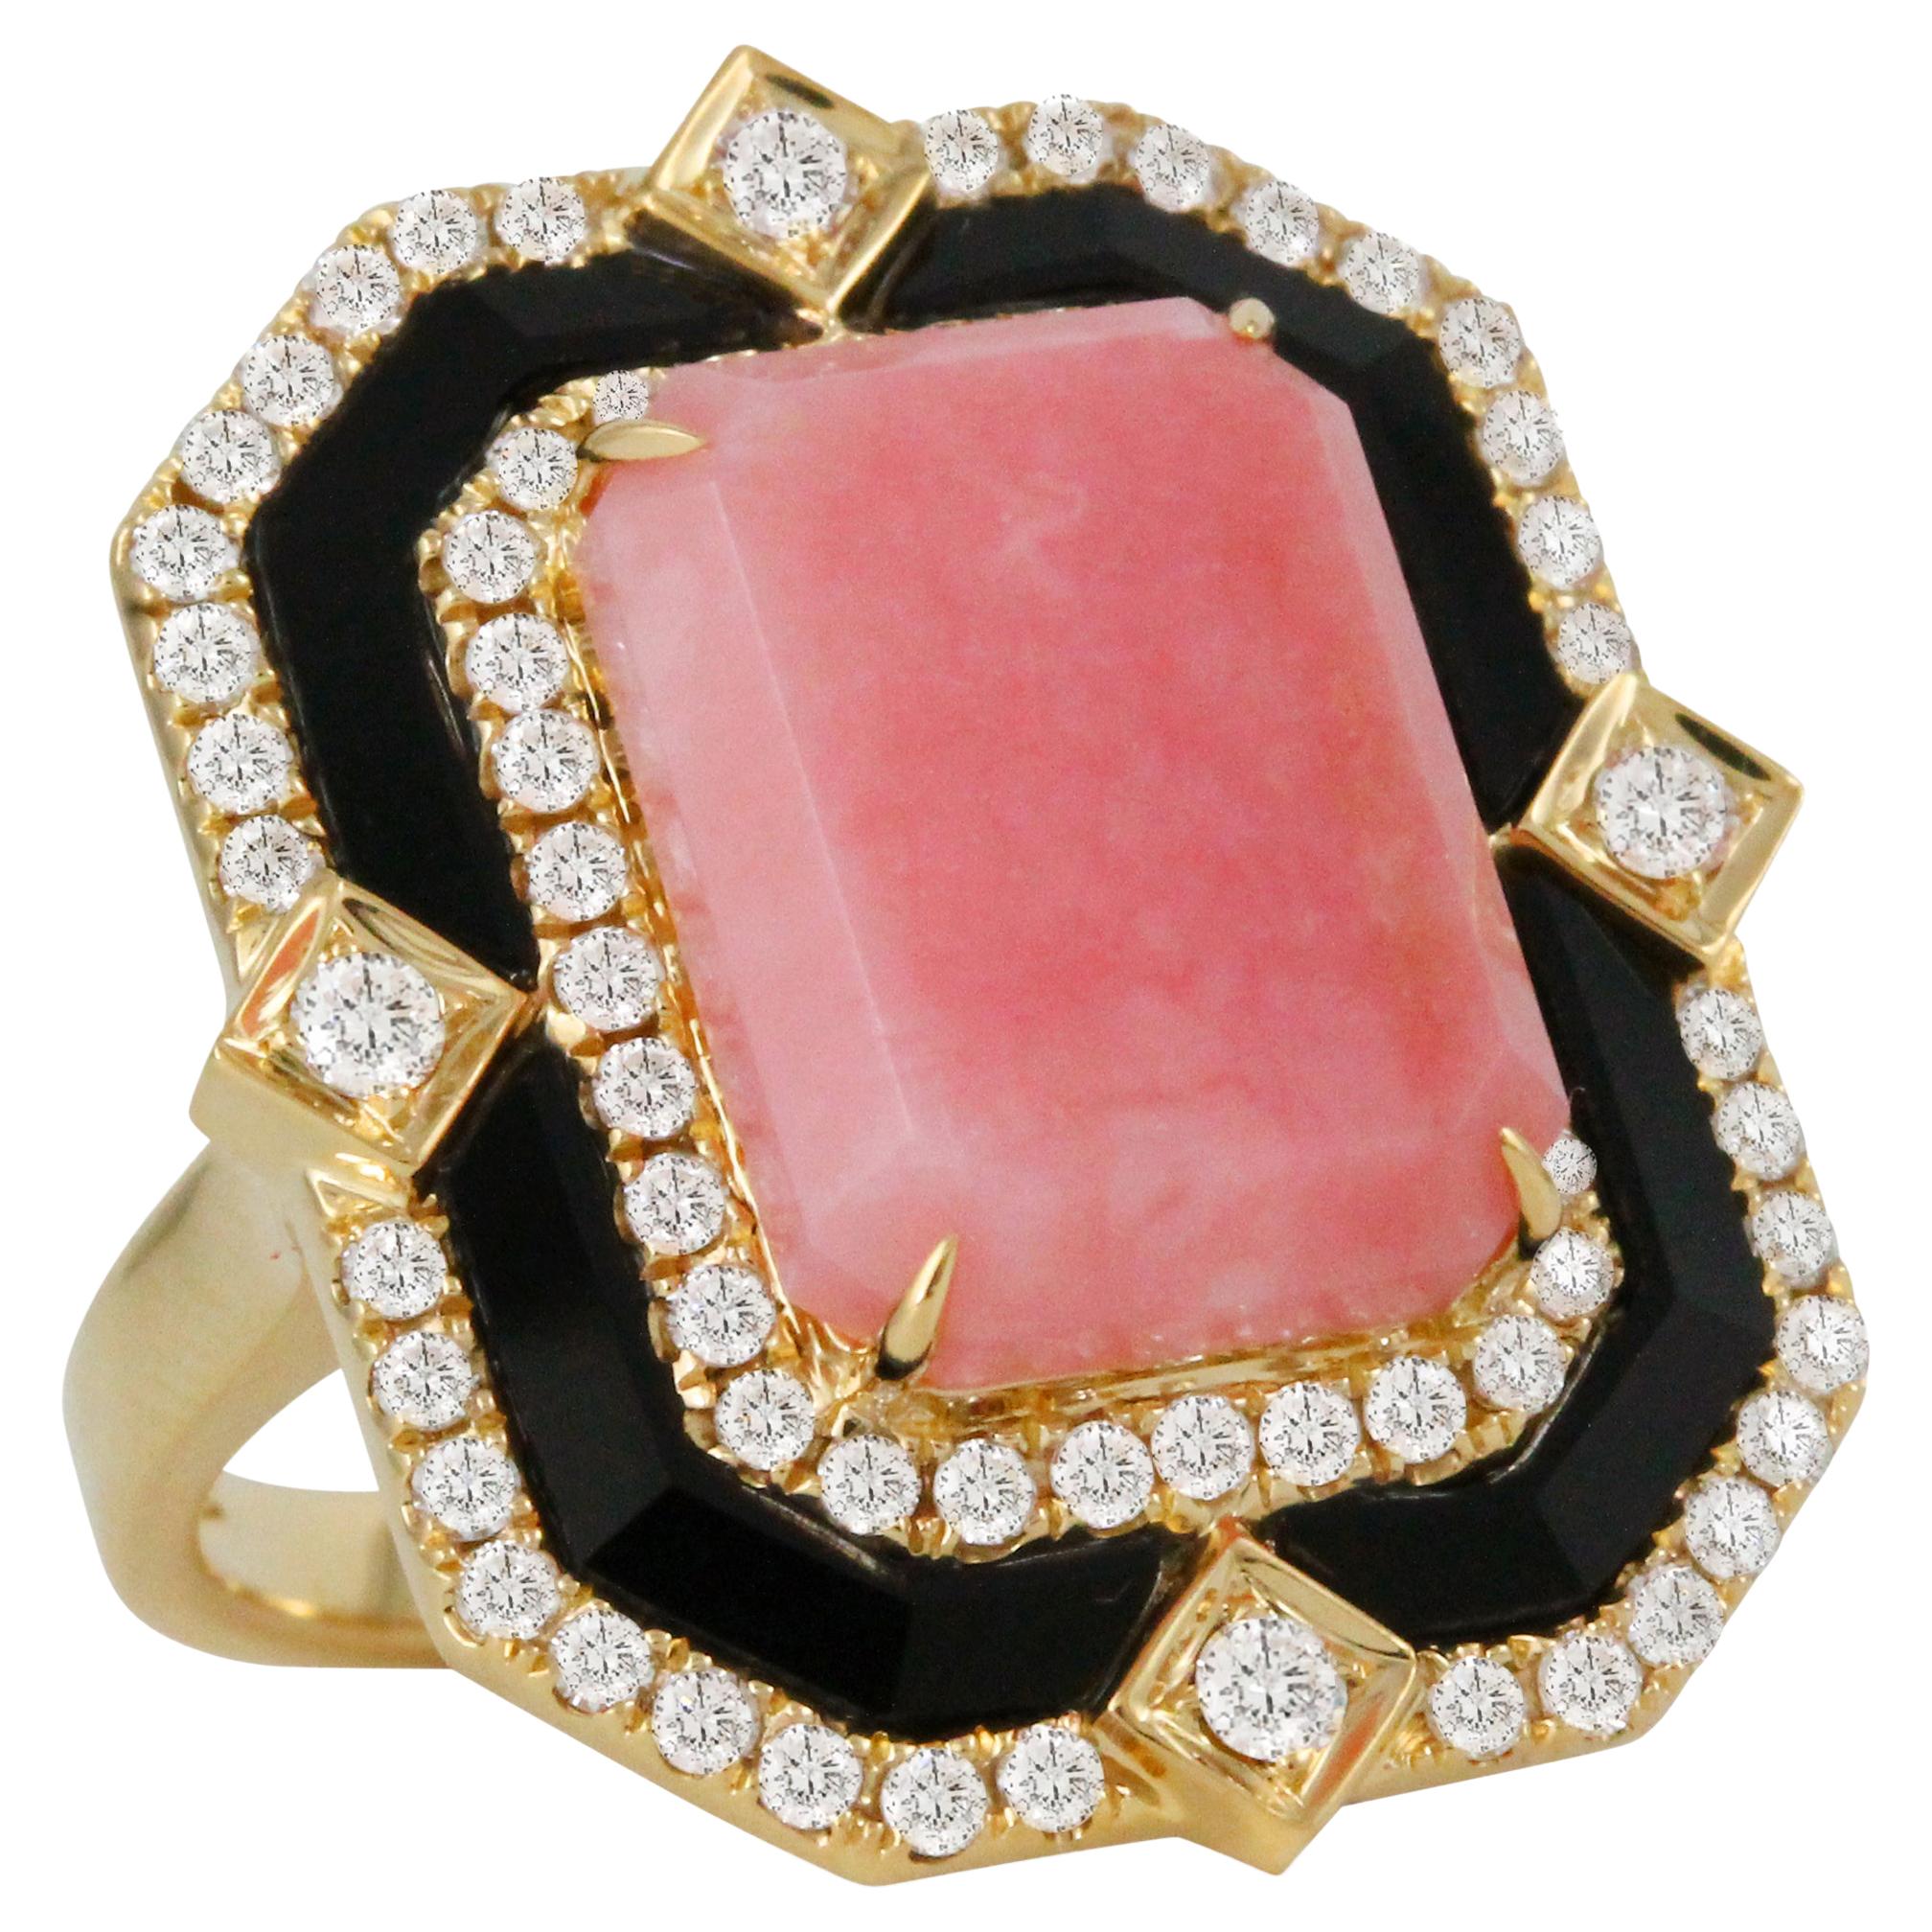 18 Karat Gold Cocktail Ring with Pink Opal, Black Onyx and Diamonds